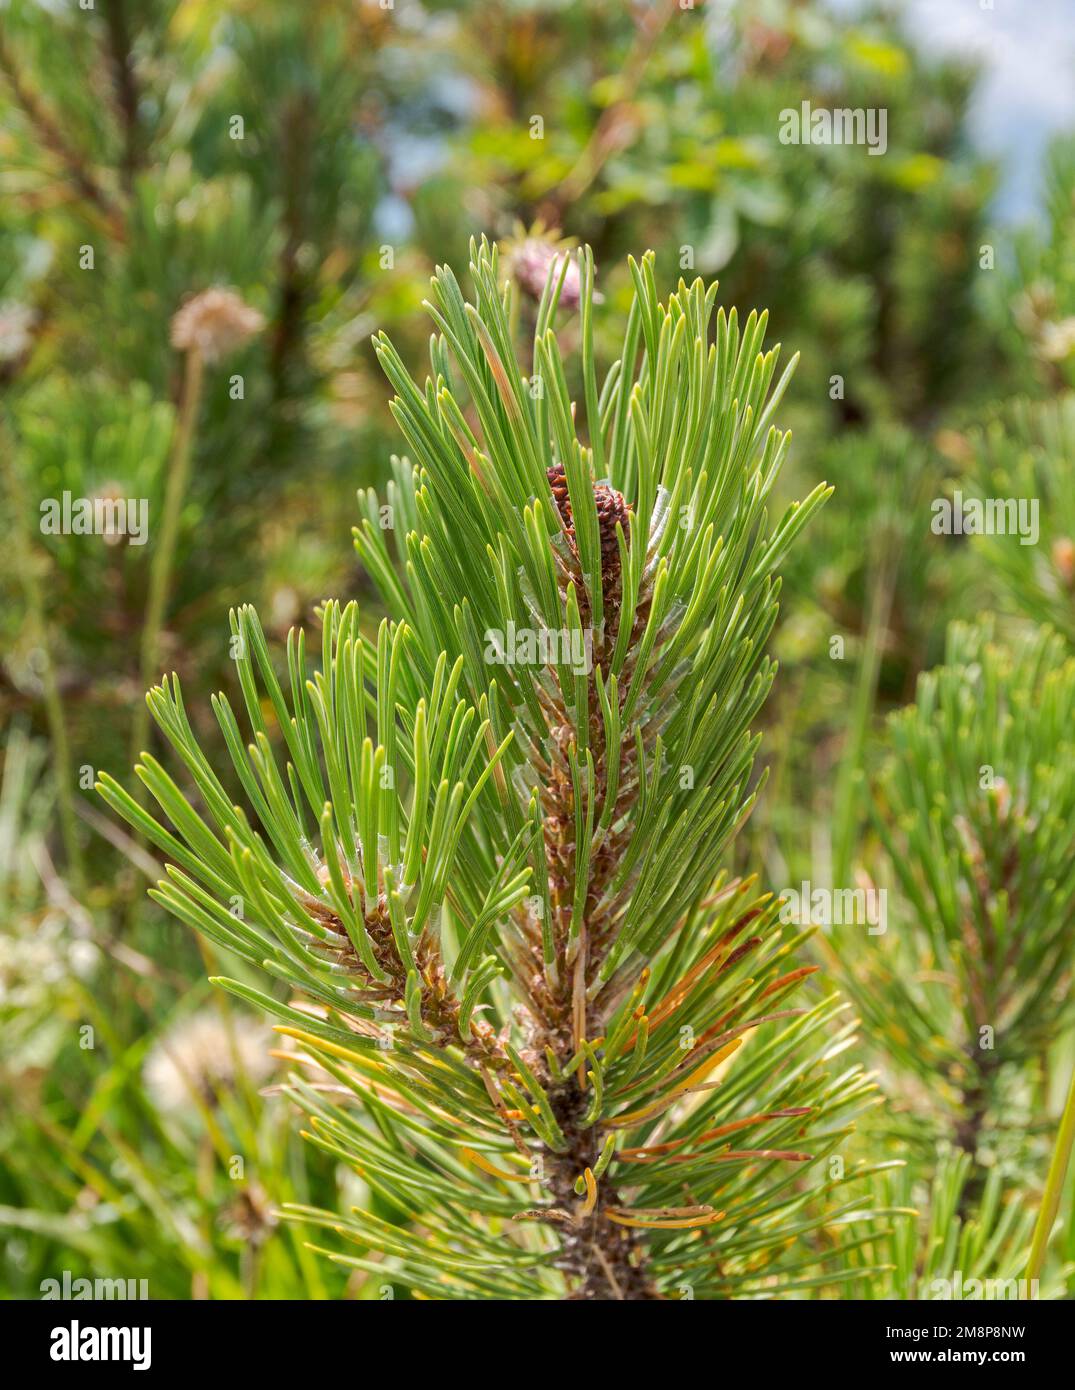 Detail of leaves and branches of Dwarf Mountain pine, Pinus mugo. Photo taken in Bavarian Alps, Berchtesgadener Land district of Bavaria in Germany. Stock Photo